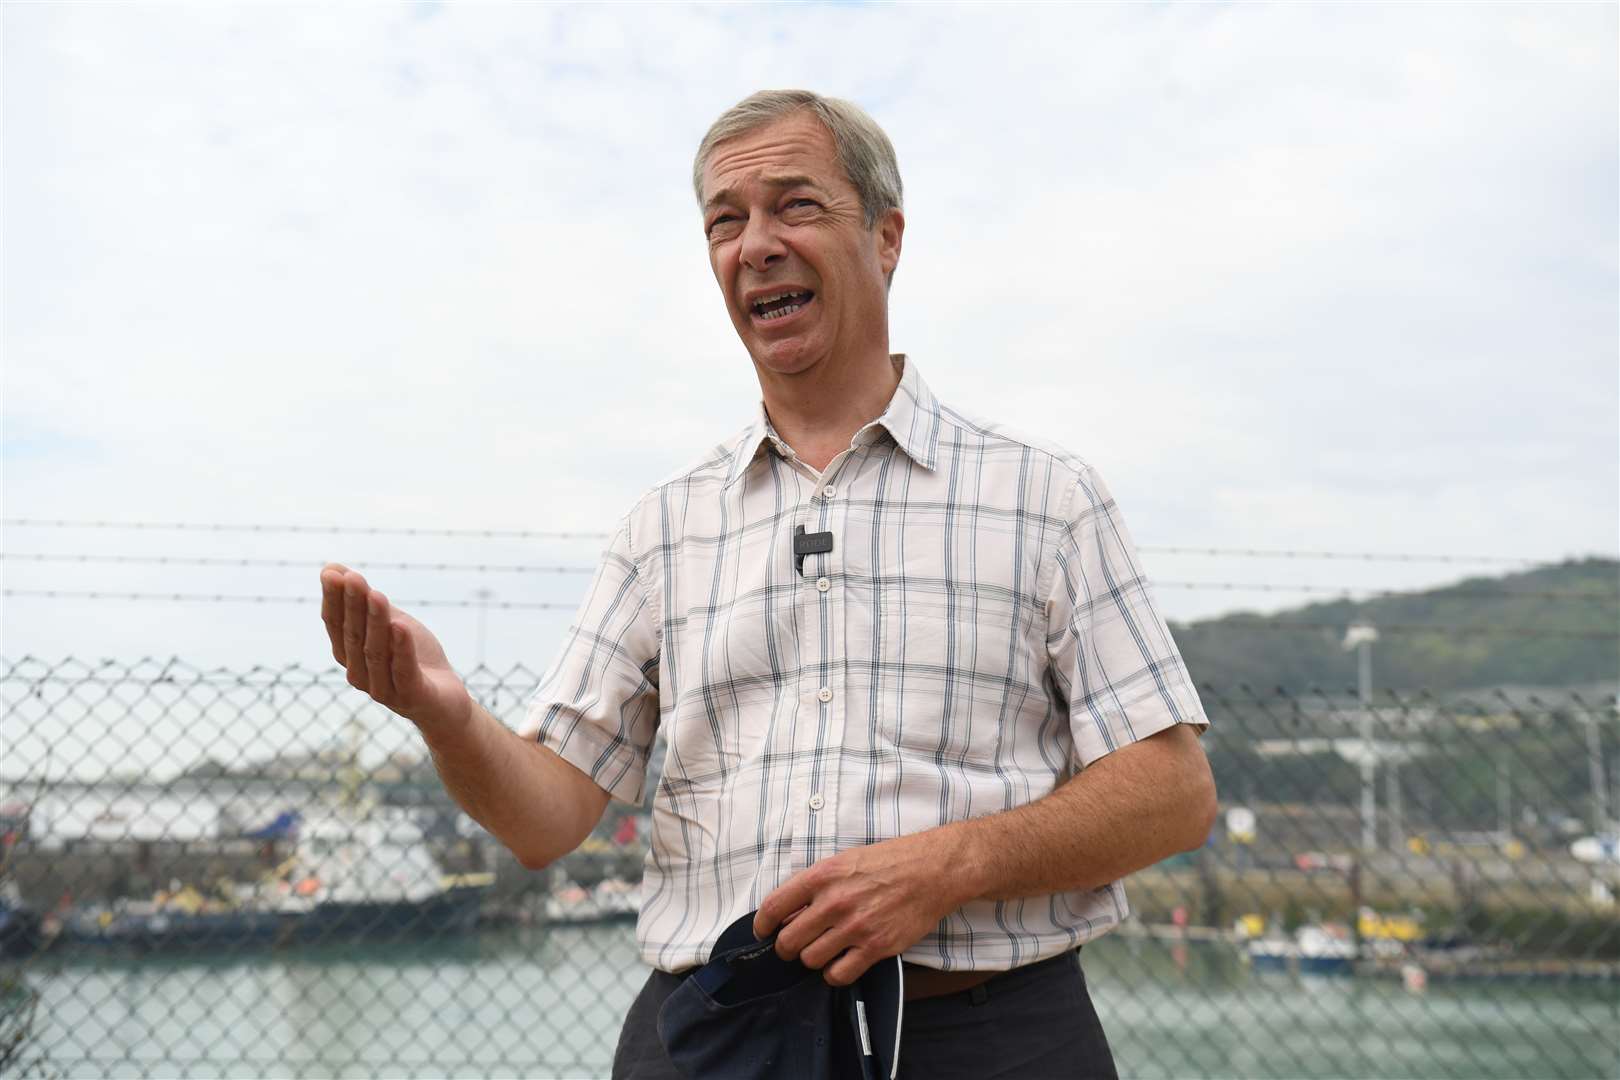 Ukip’s political influence has waned since Nigel Farage stepped down as leader in 2016 (Kirsty O’Connor/PA)